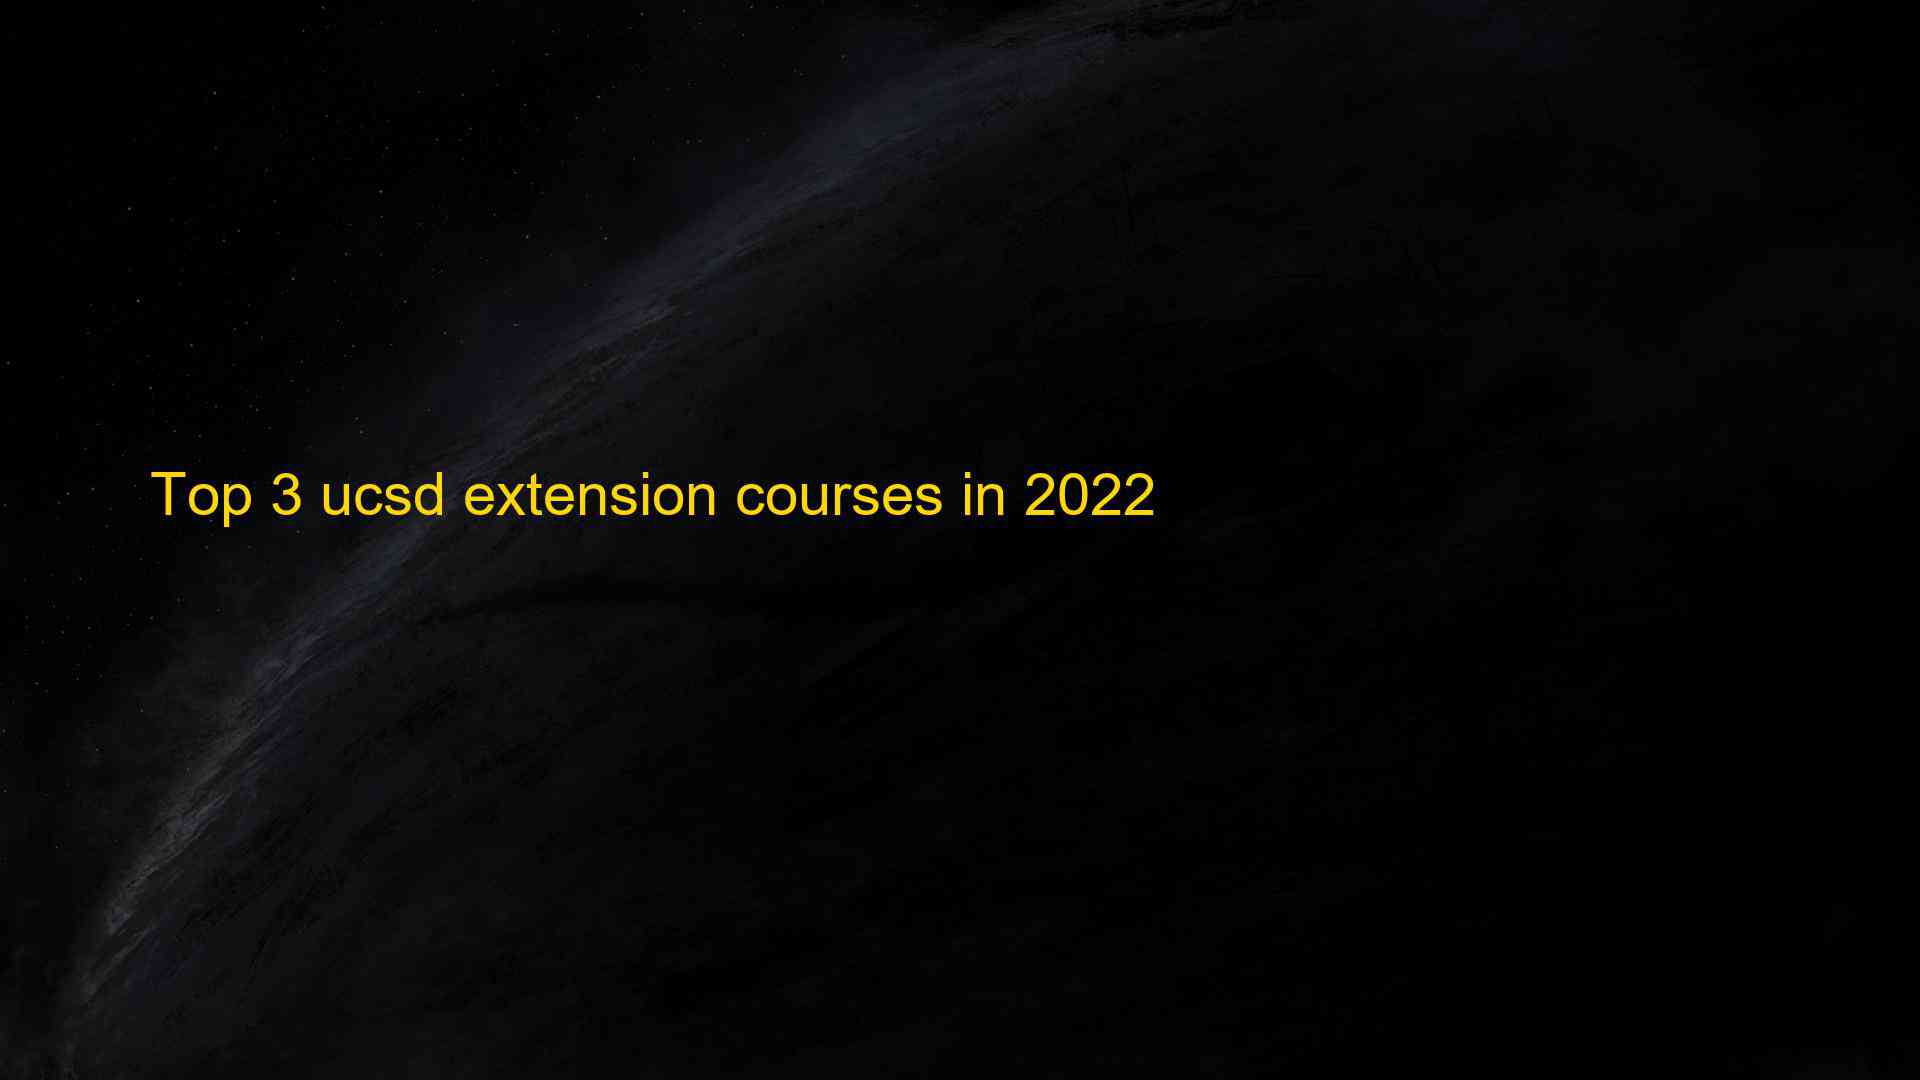 Top 3 ucsd extension courses in 2022 1661934709